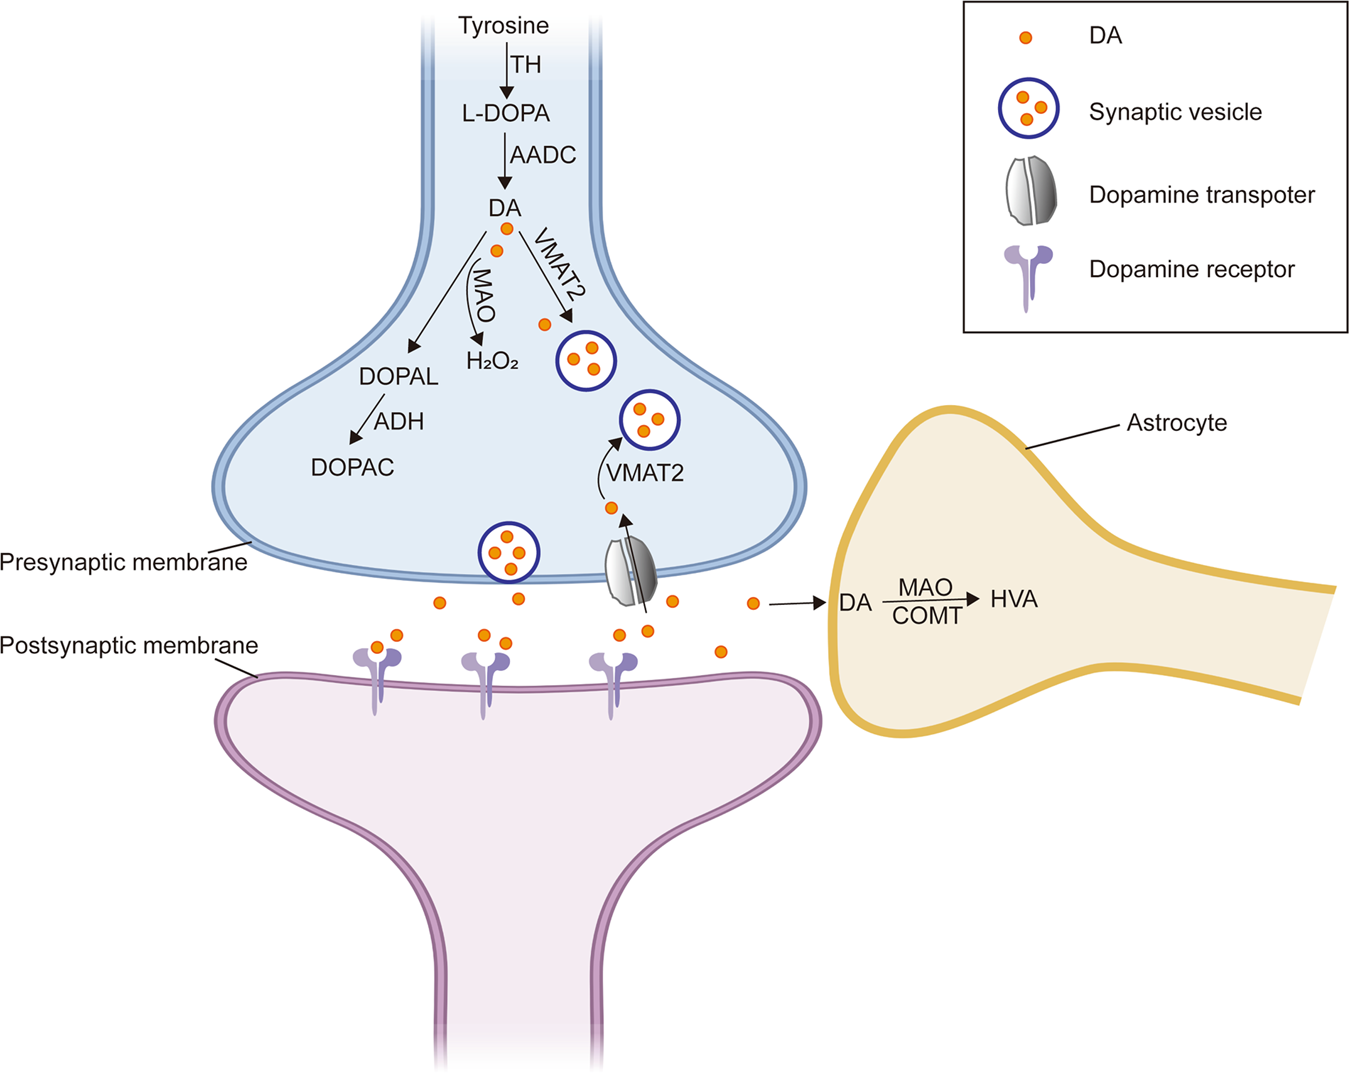 The interplay of dopamine metabolism abnormalities and mitochondrial  defects in the pathogenesis of schizophrenia | Translational Psychiatry